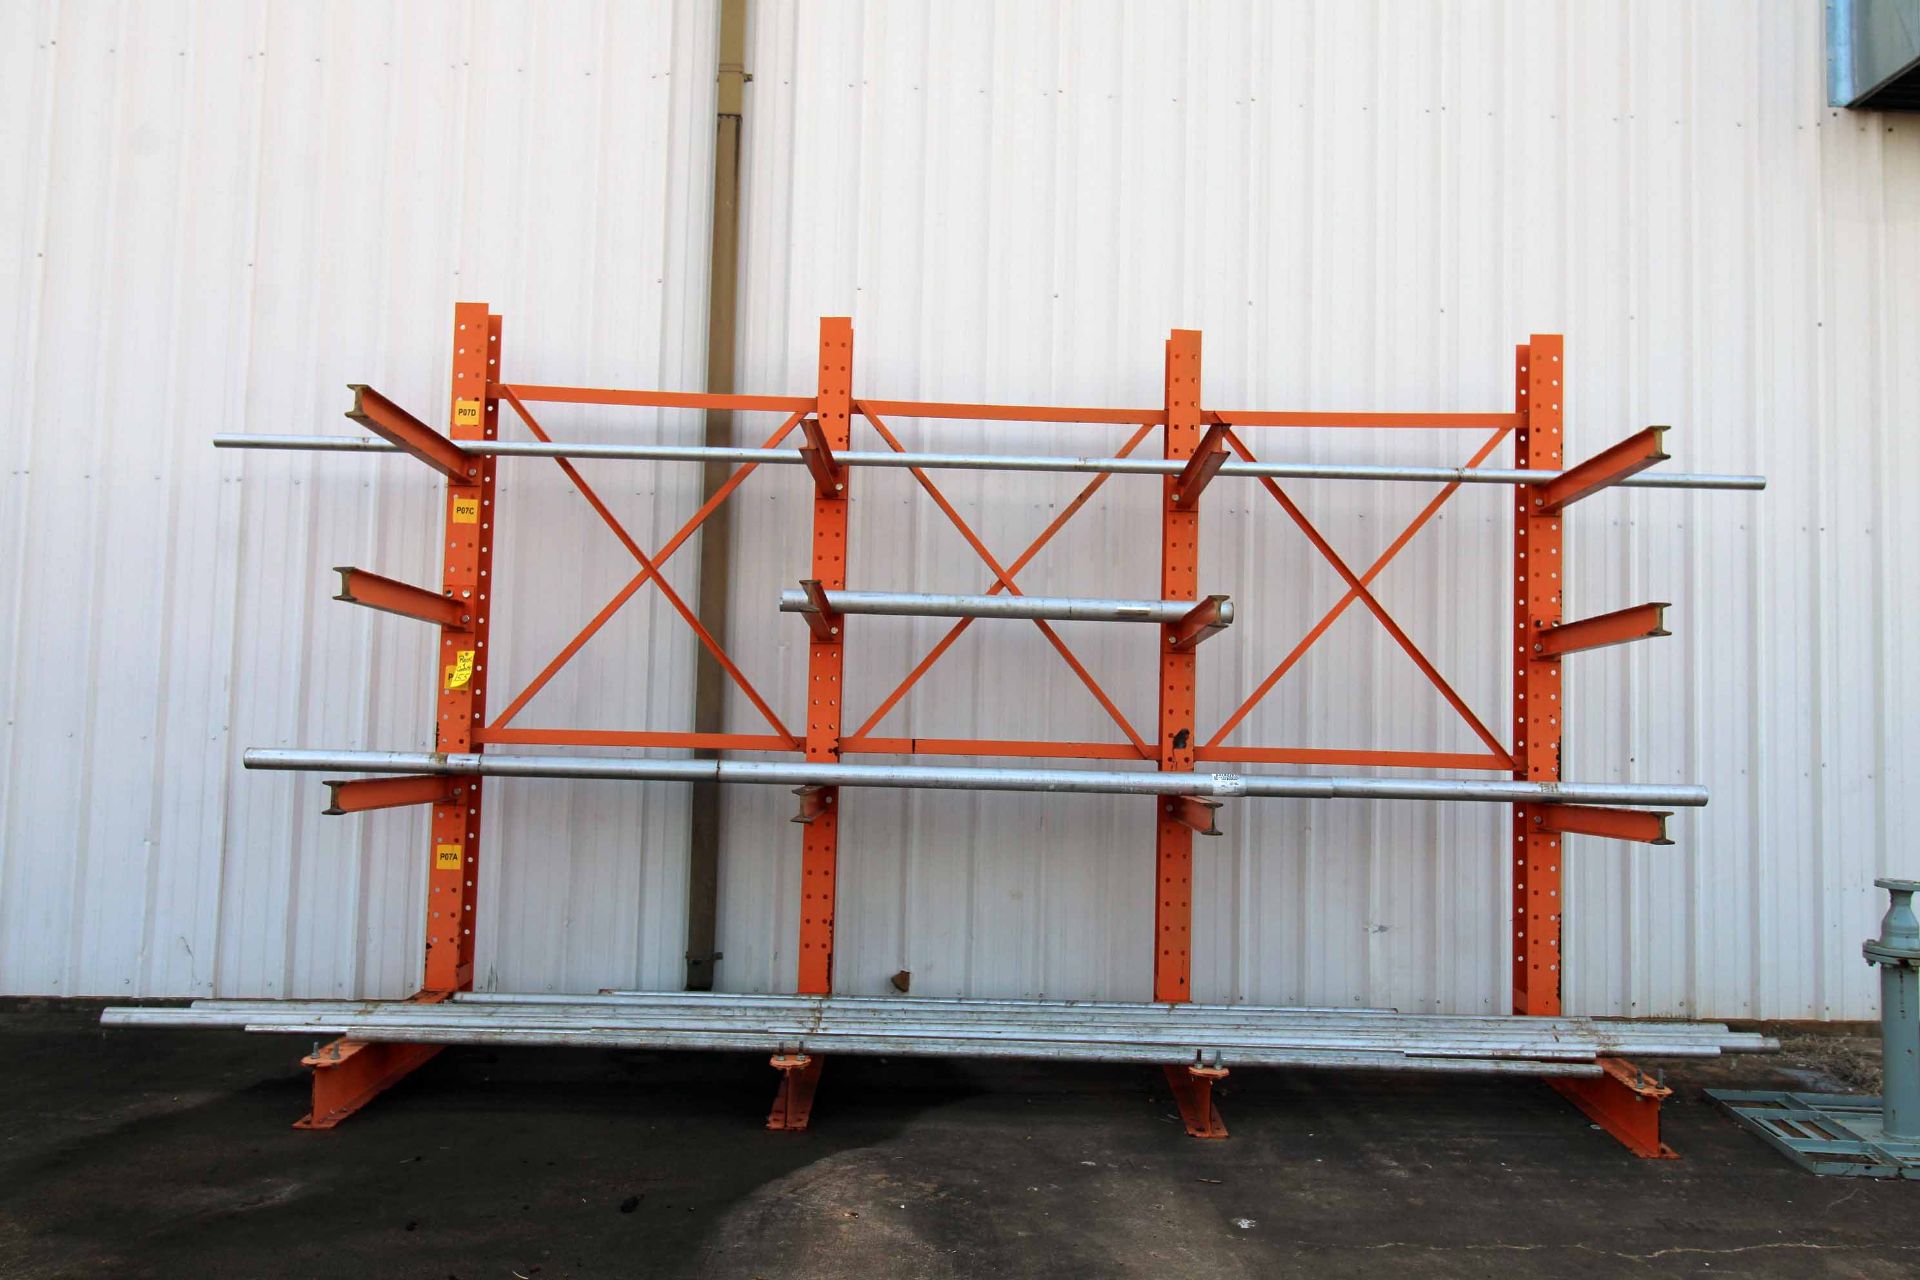 LOT OF CANTILEVER RACK SECTIONS (4): (2) w/ 4' arms x 15'W. x 10'ht., (2) w/ 4' arms x 10'W. x 10'